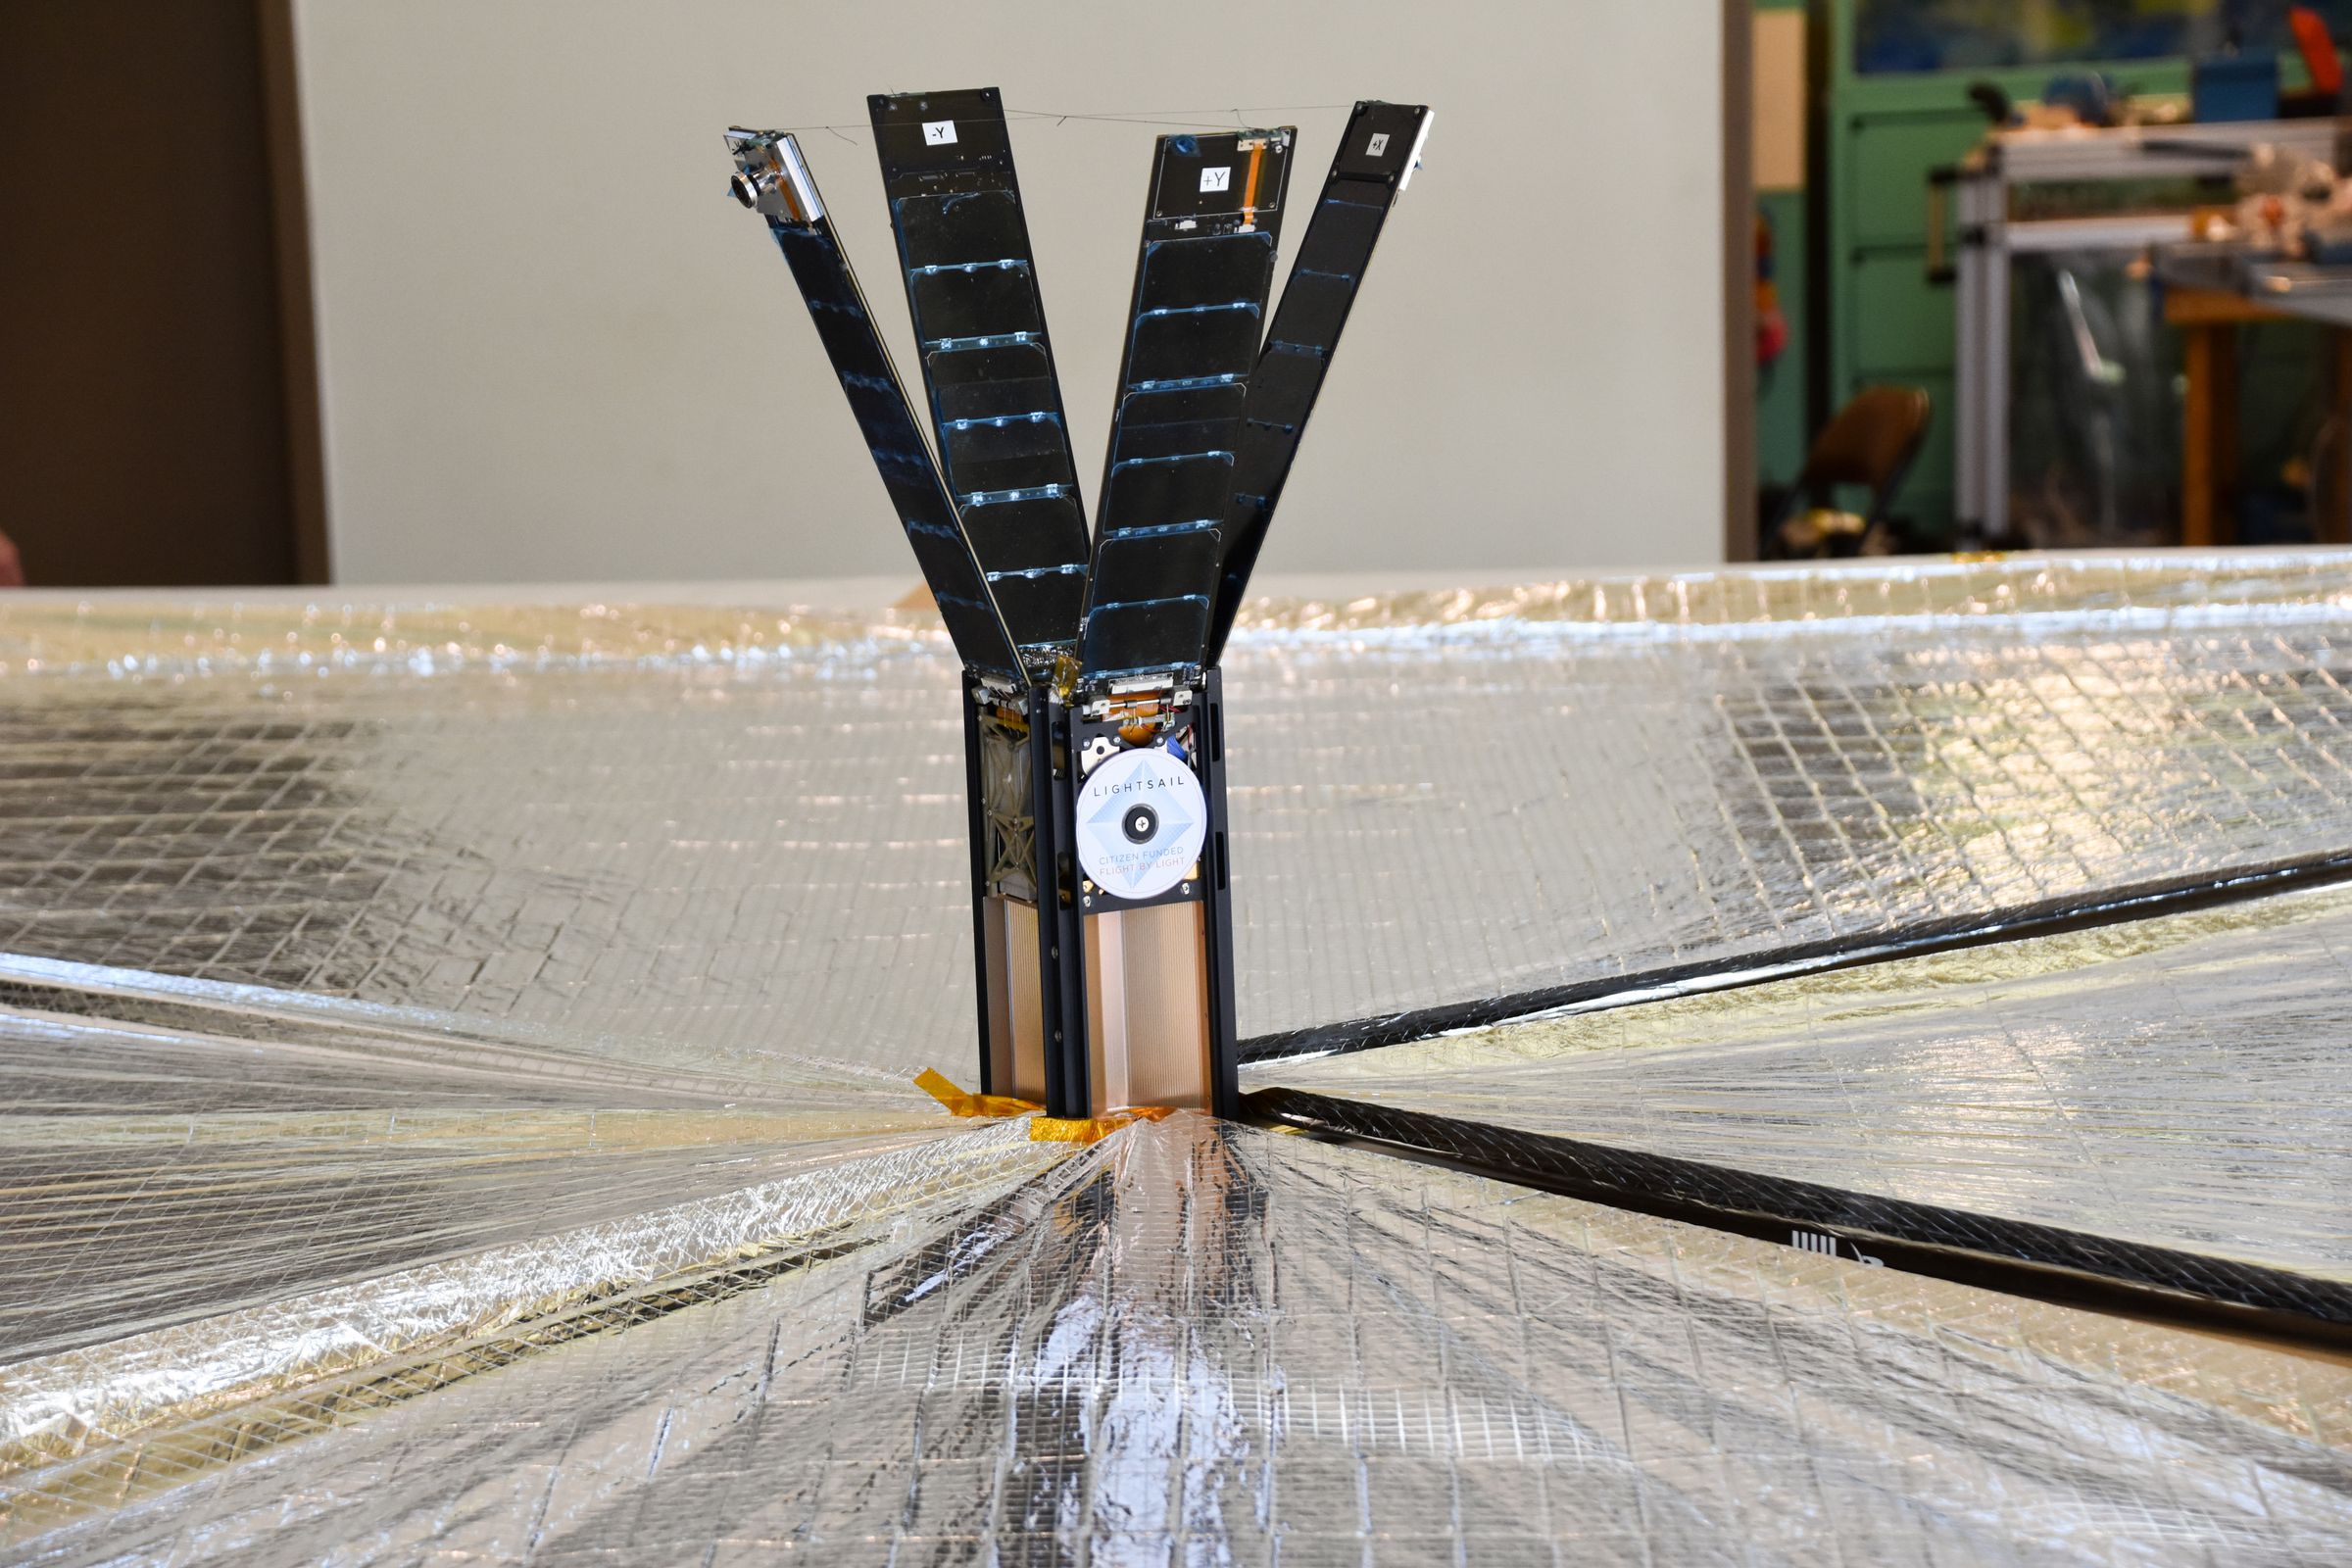 The LightSail 2 spacecraft with its solar panels and solar sail deployed.